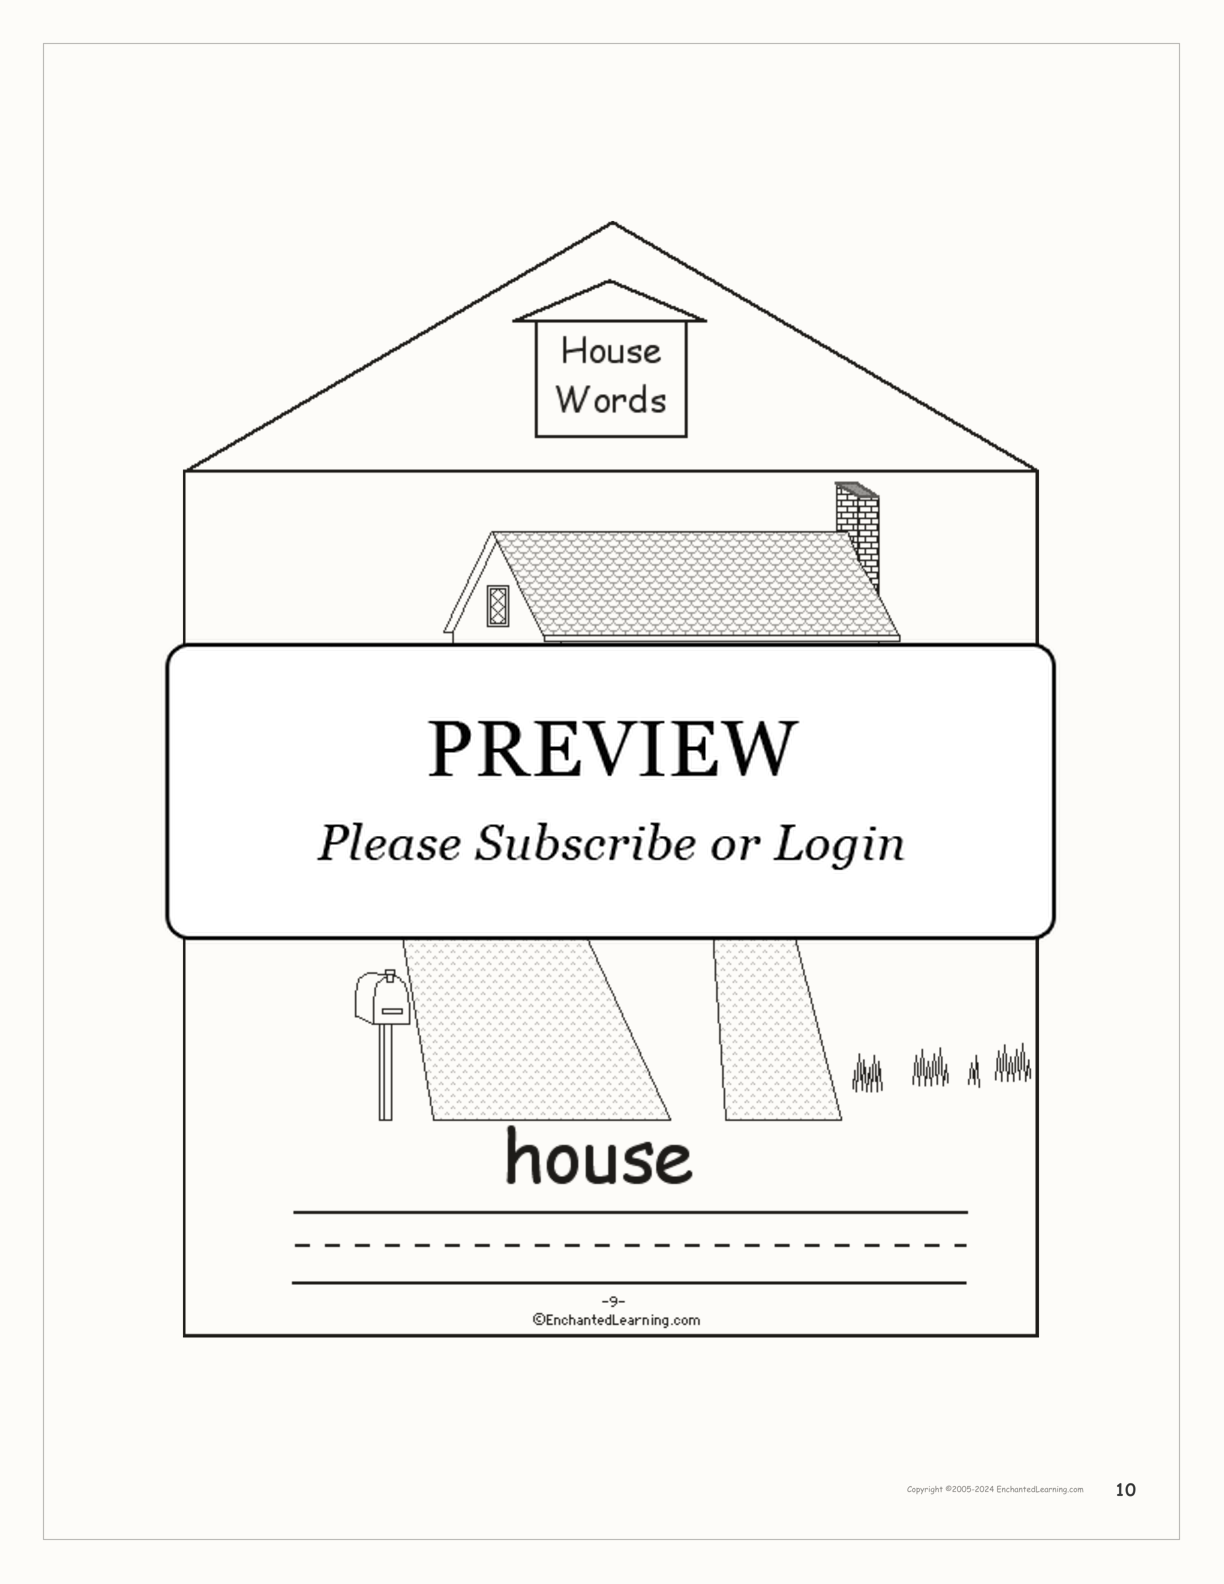 House Words Book interactive printout page 10